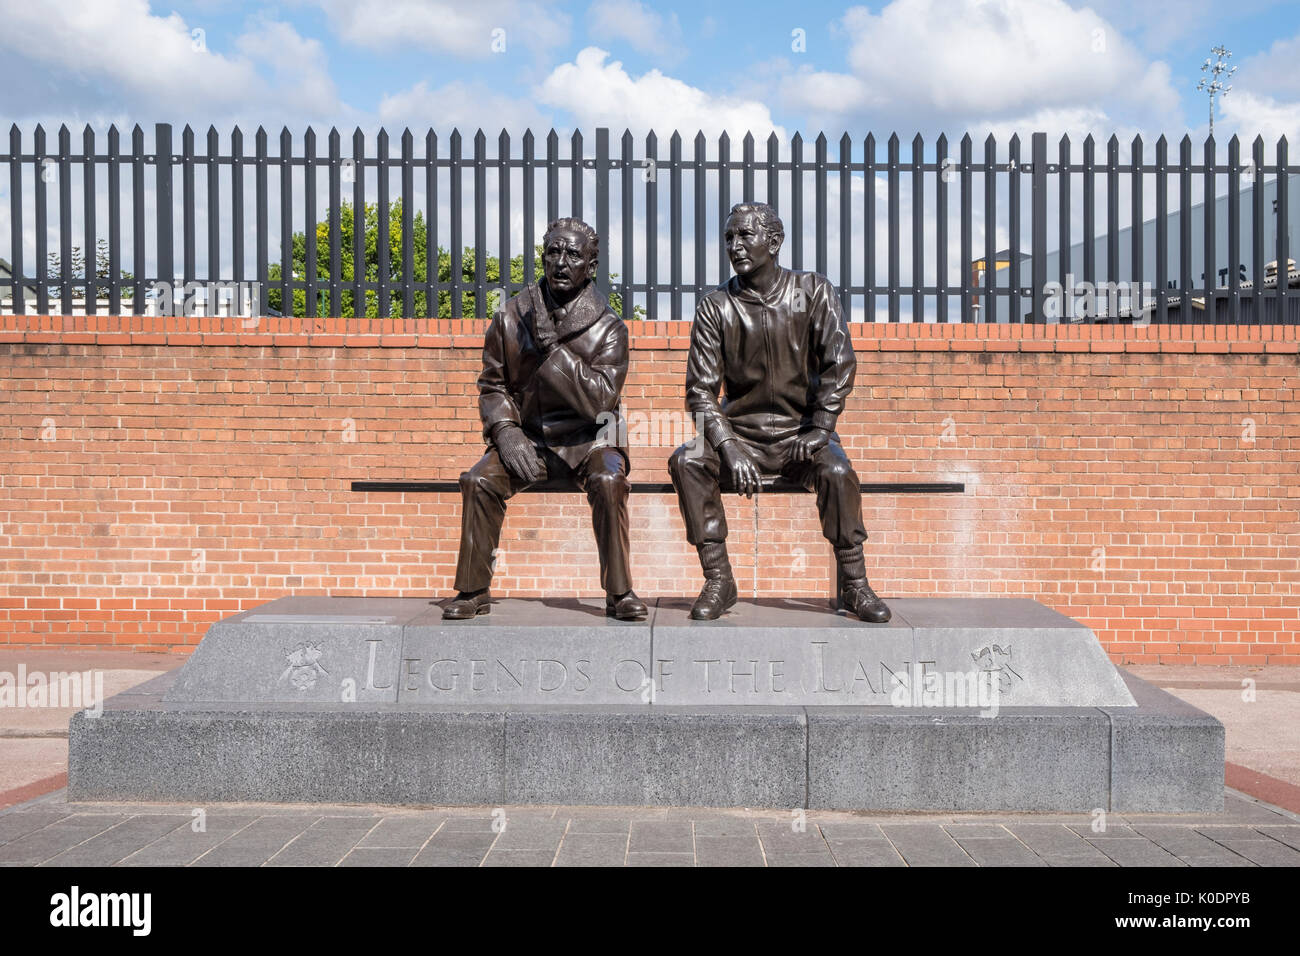 Legends of the Lane statue. Statues of Jimmy Sirrel and Jack Wheeler at Notts County Football Ground, Meadow Lane, Nottingham, England, UK Stock Photo